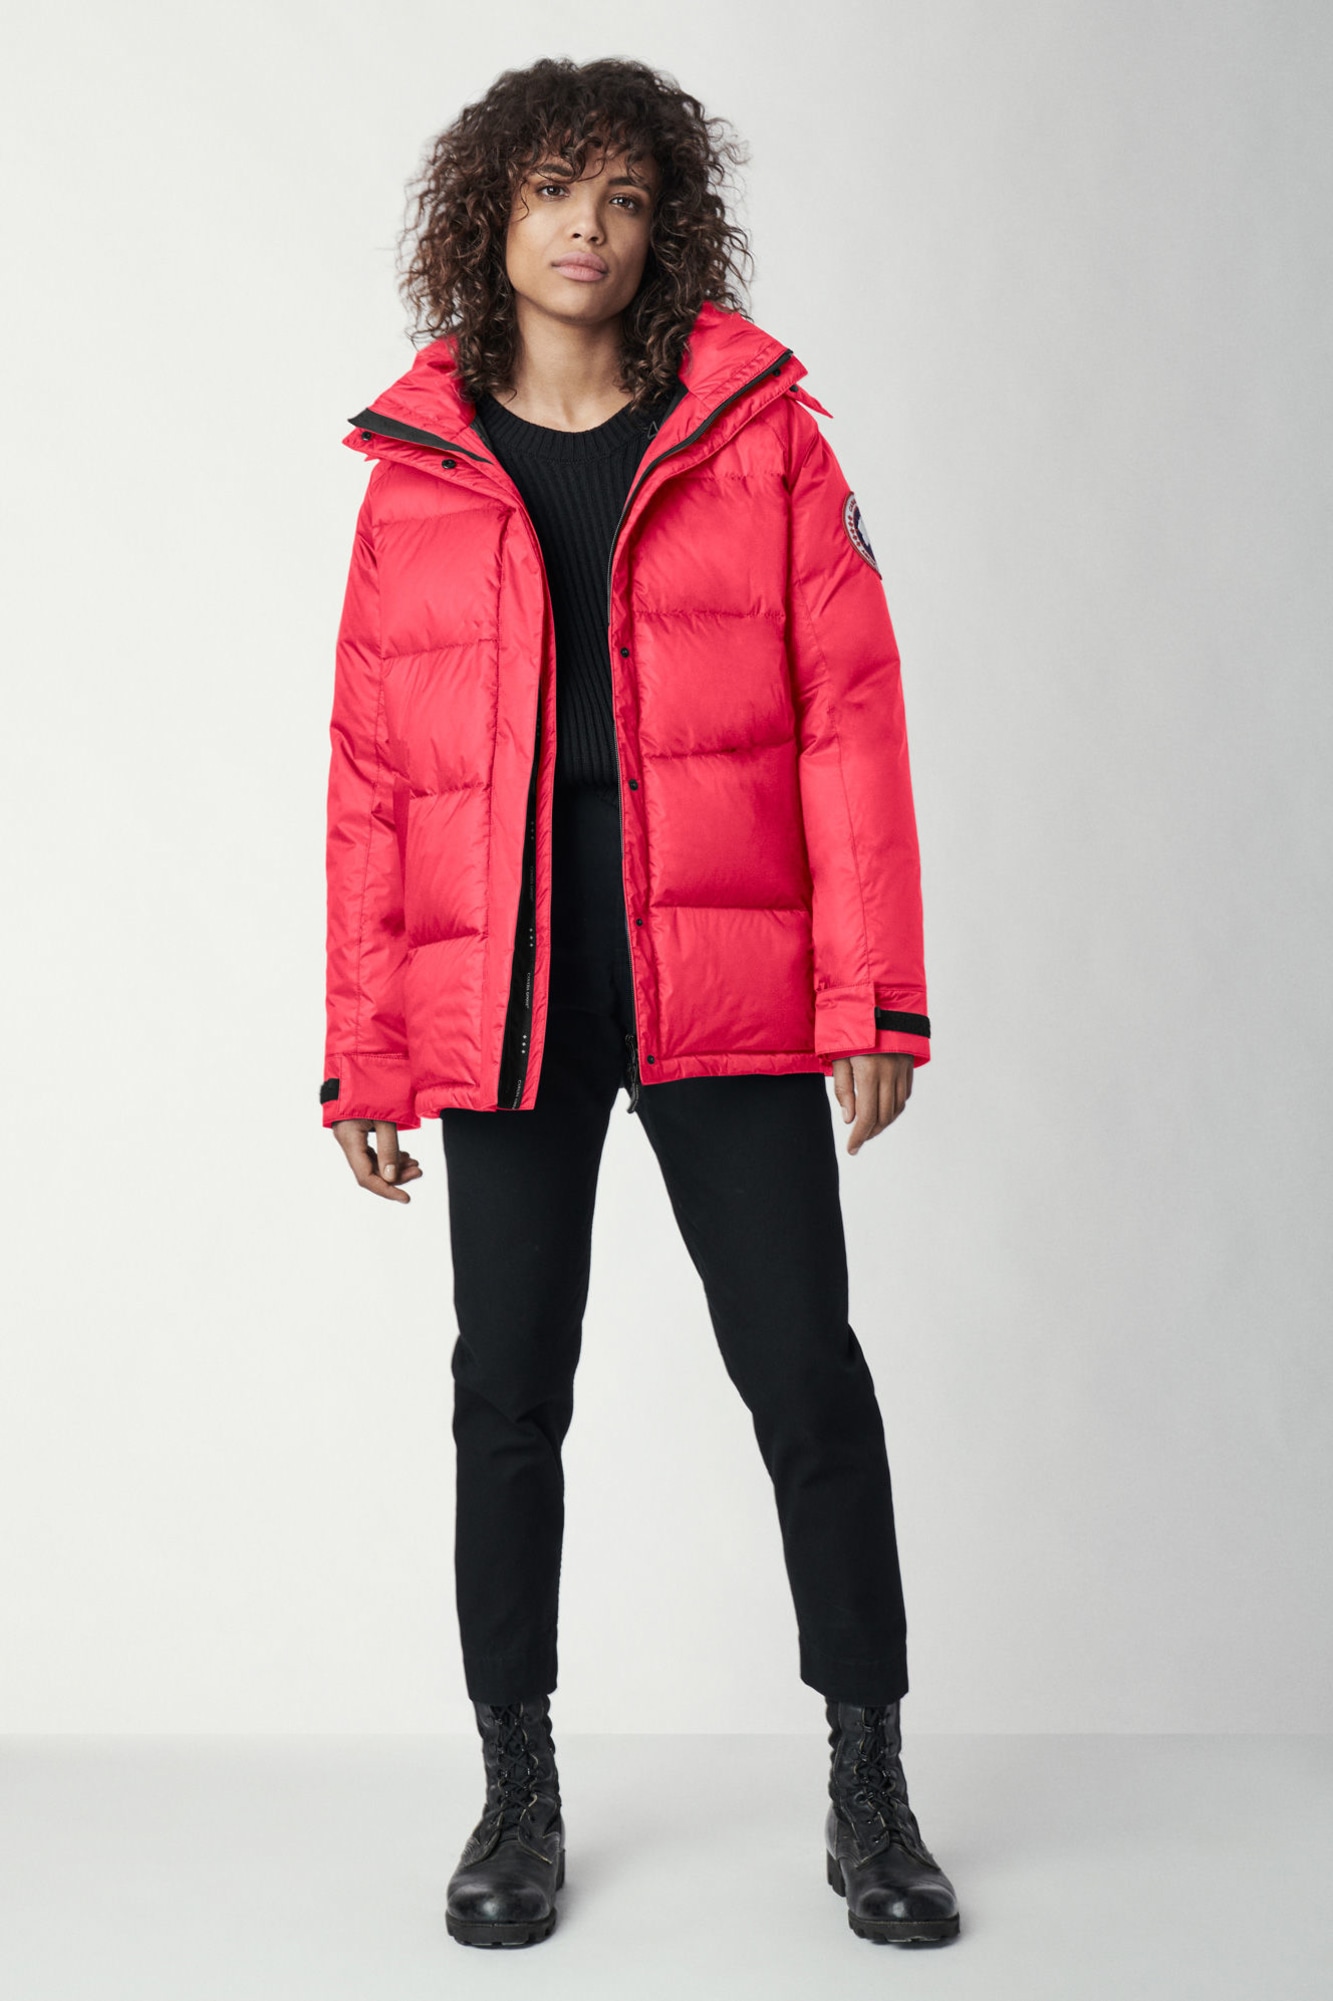 Canada Goose Fur Replacement Cost Women S Approach Jacket Canada Goose